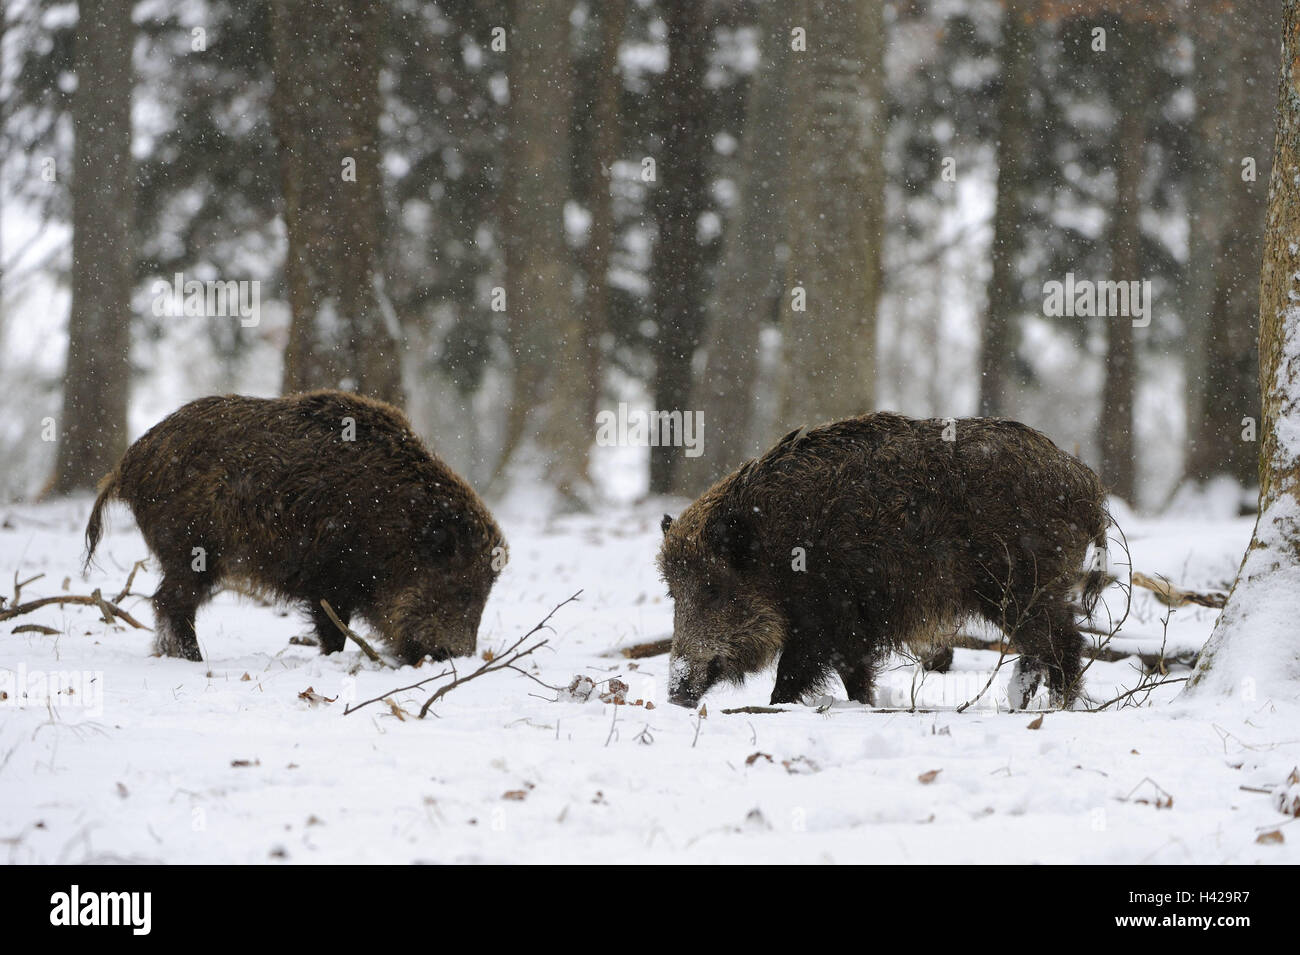 Wood, wild boars, Sus scrofa, lining search, snowflakes, mammals, animals, wild animals, vertebrates, mammals, hungry, black game, cloven-hoofed animal, two, side view, winter, cold, snow, snowfall, animal world, meadow, Wildlife, nature, Stock Photo